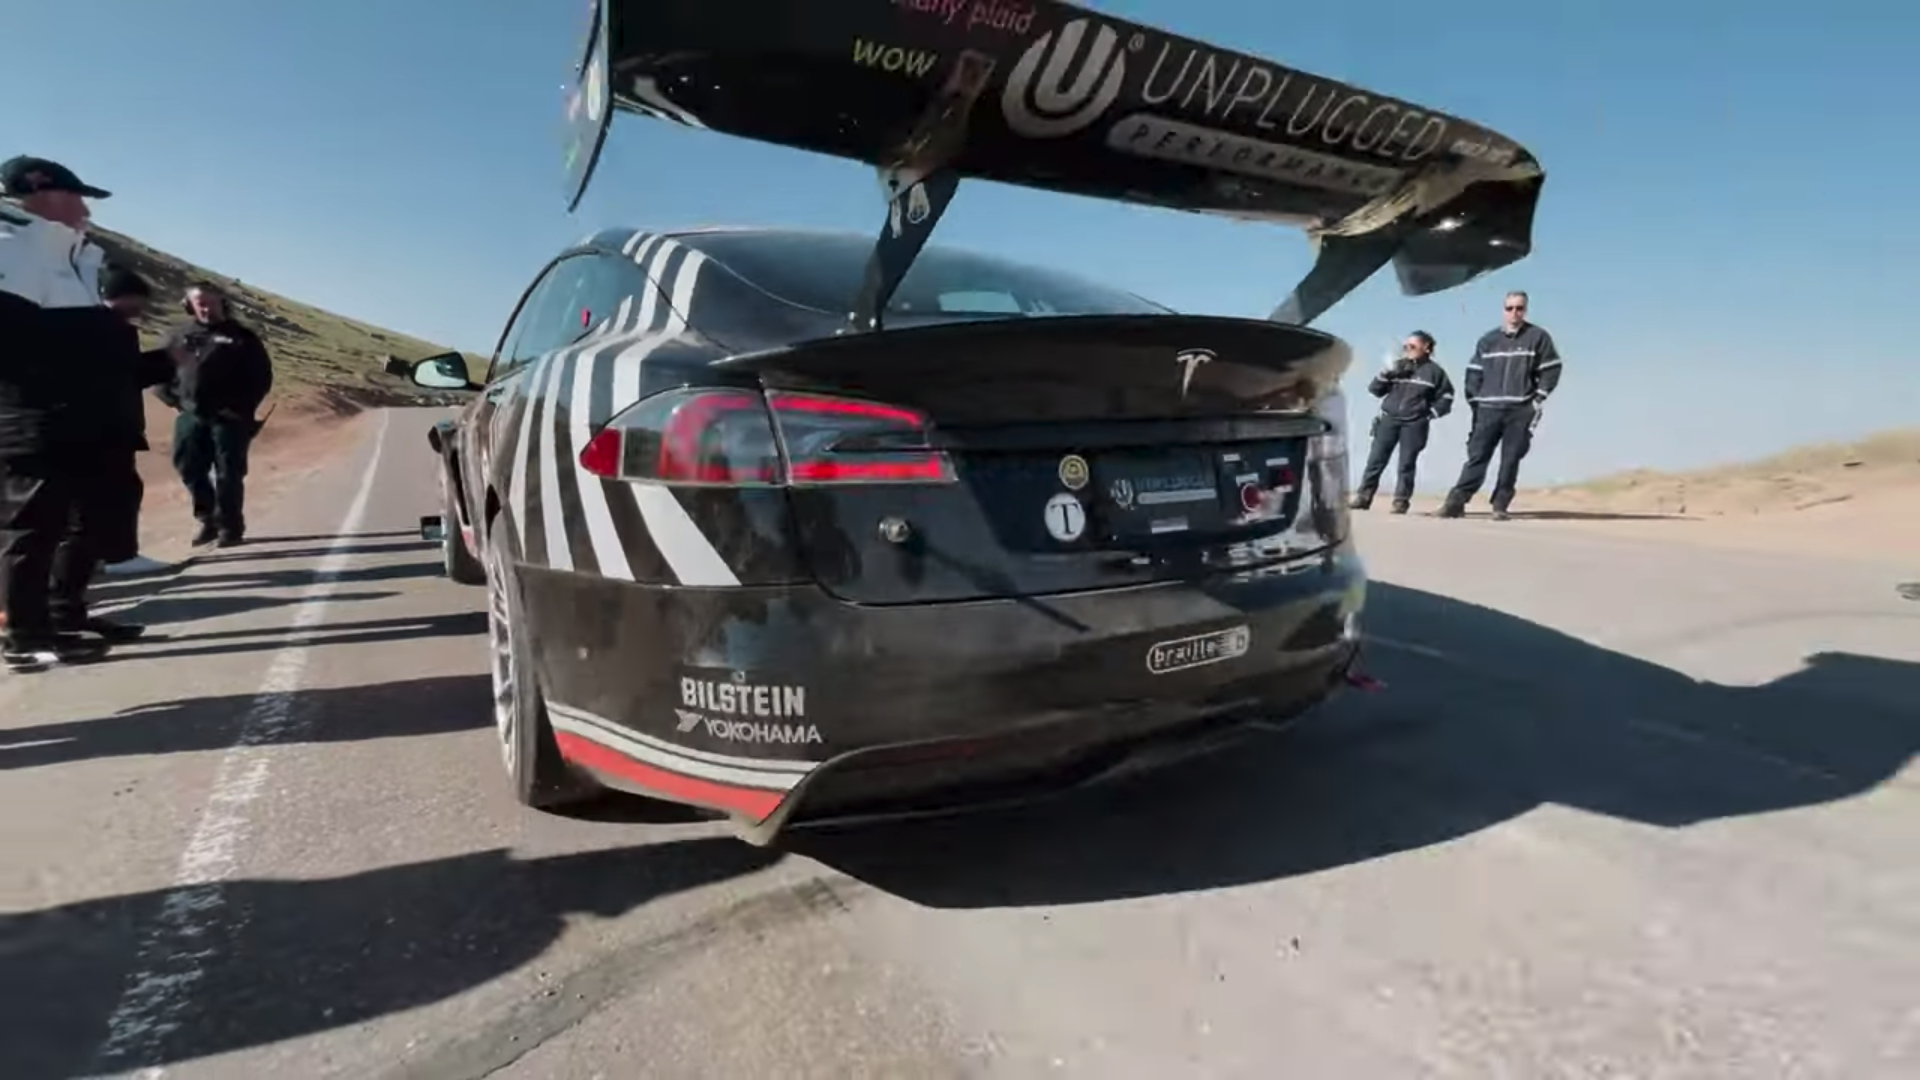 Download Watch A Modded Tesla Model S Plaid Fly Up Pikes Peak